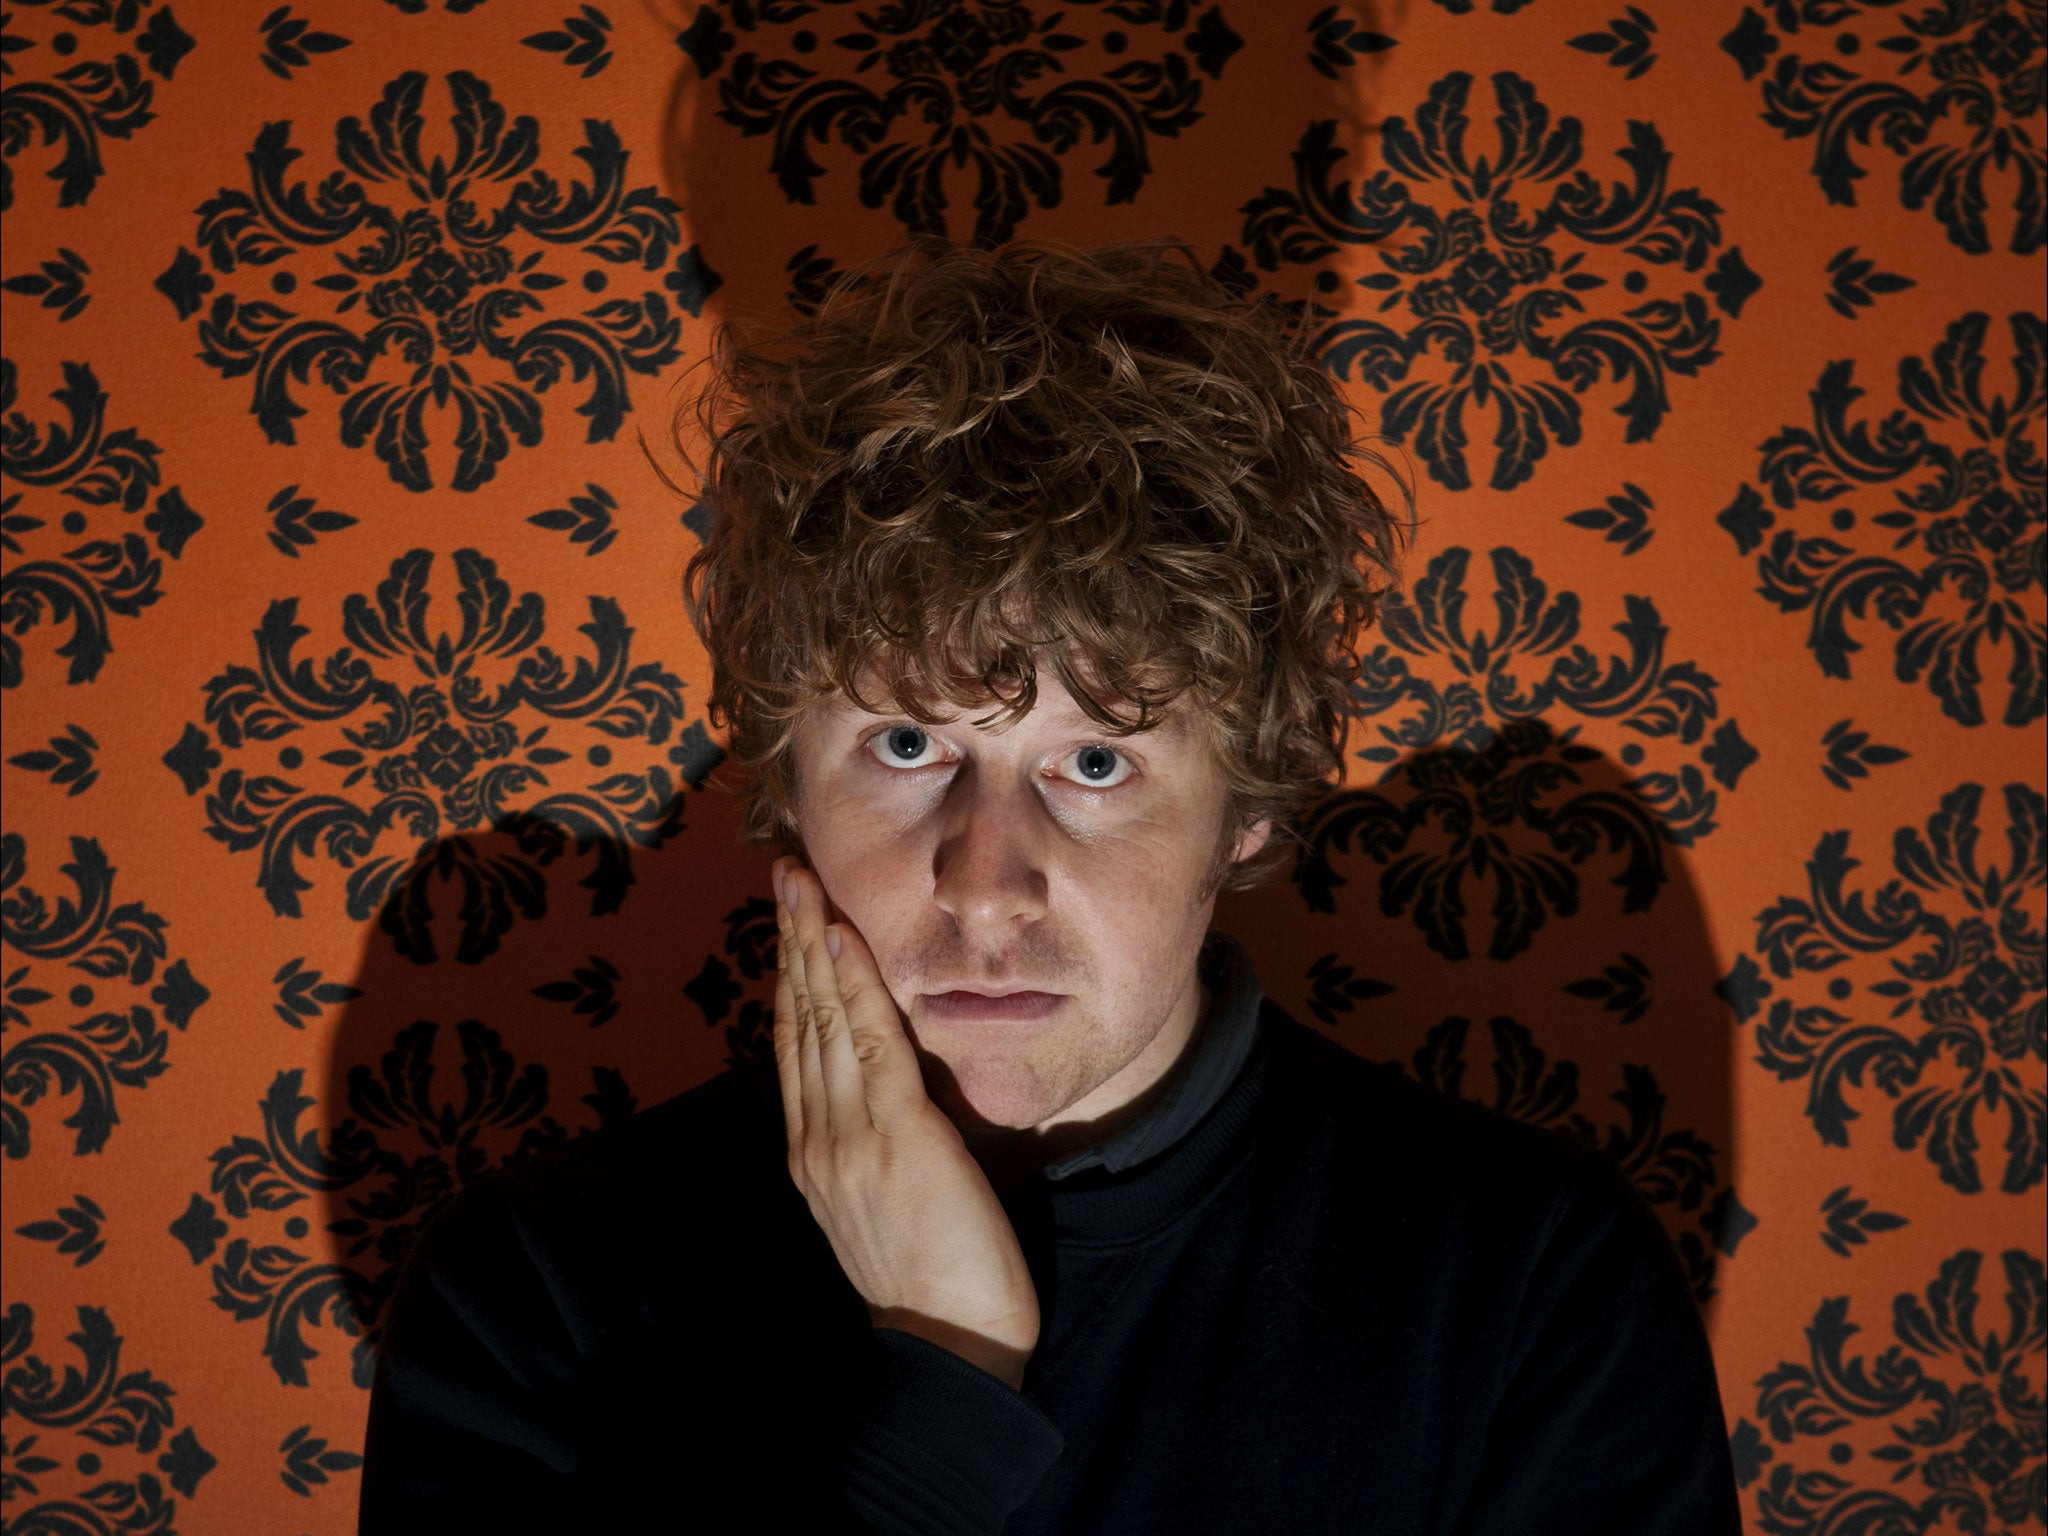 Stand-up comedian Josh Widdicombe puts the suddenness of his success down to splitting with his girlfriend